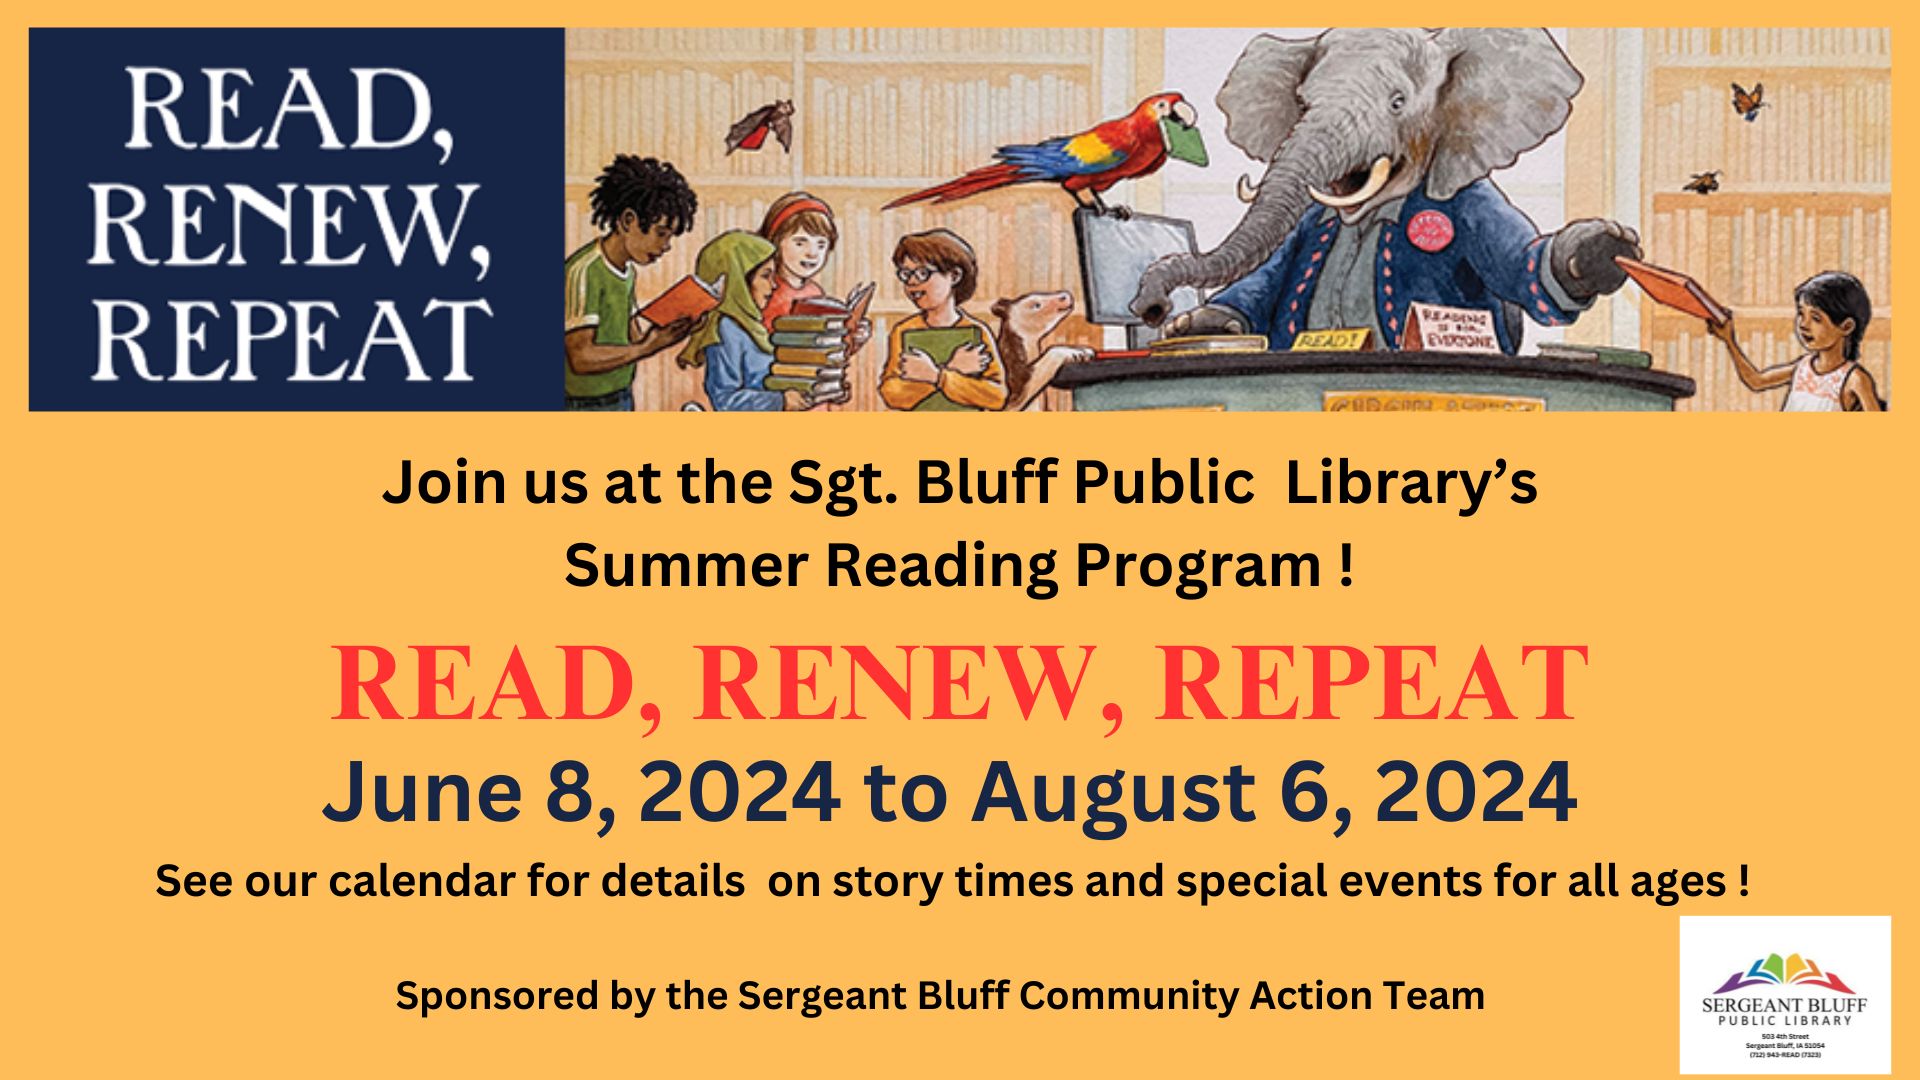 Join us at the Sgt. Bluff Public Library’s Summer Reading Program ! (1).jpg